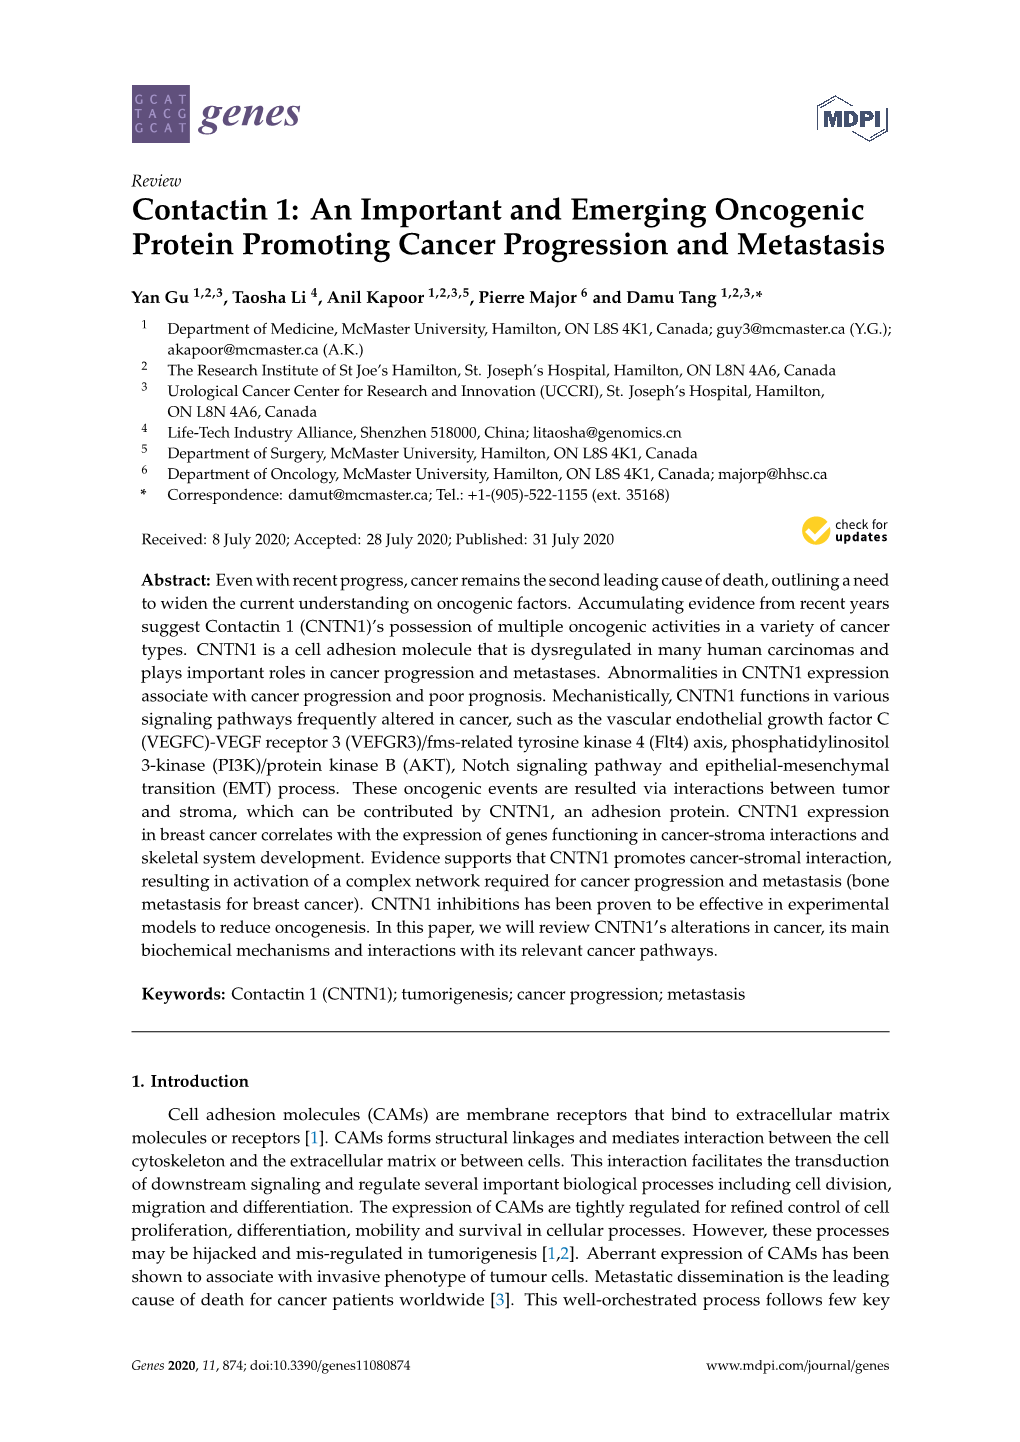 Contactin 1: an Important and Emerging Oncogenic Protein Promoting Cancer Progression and Metastasis